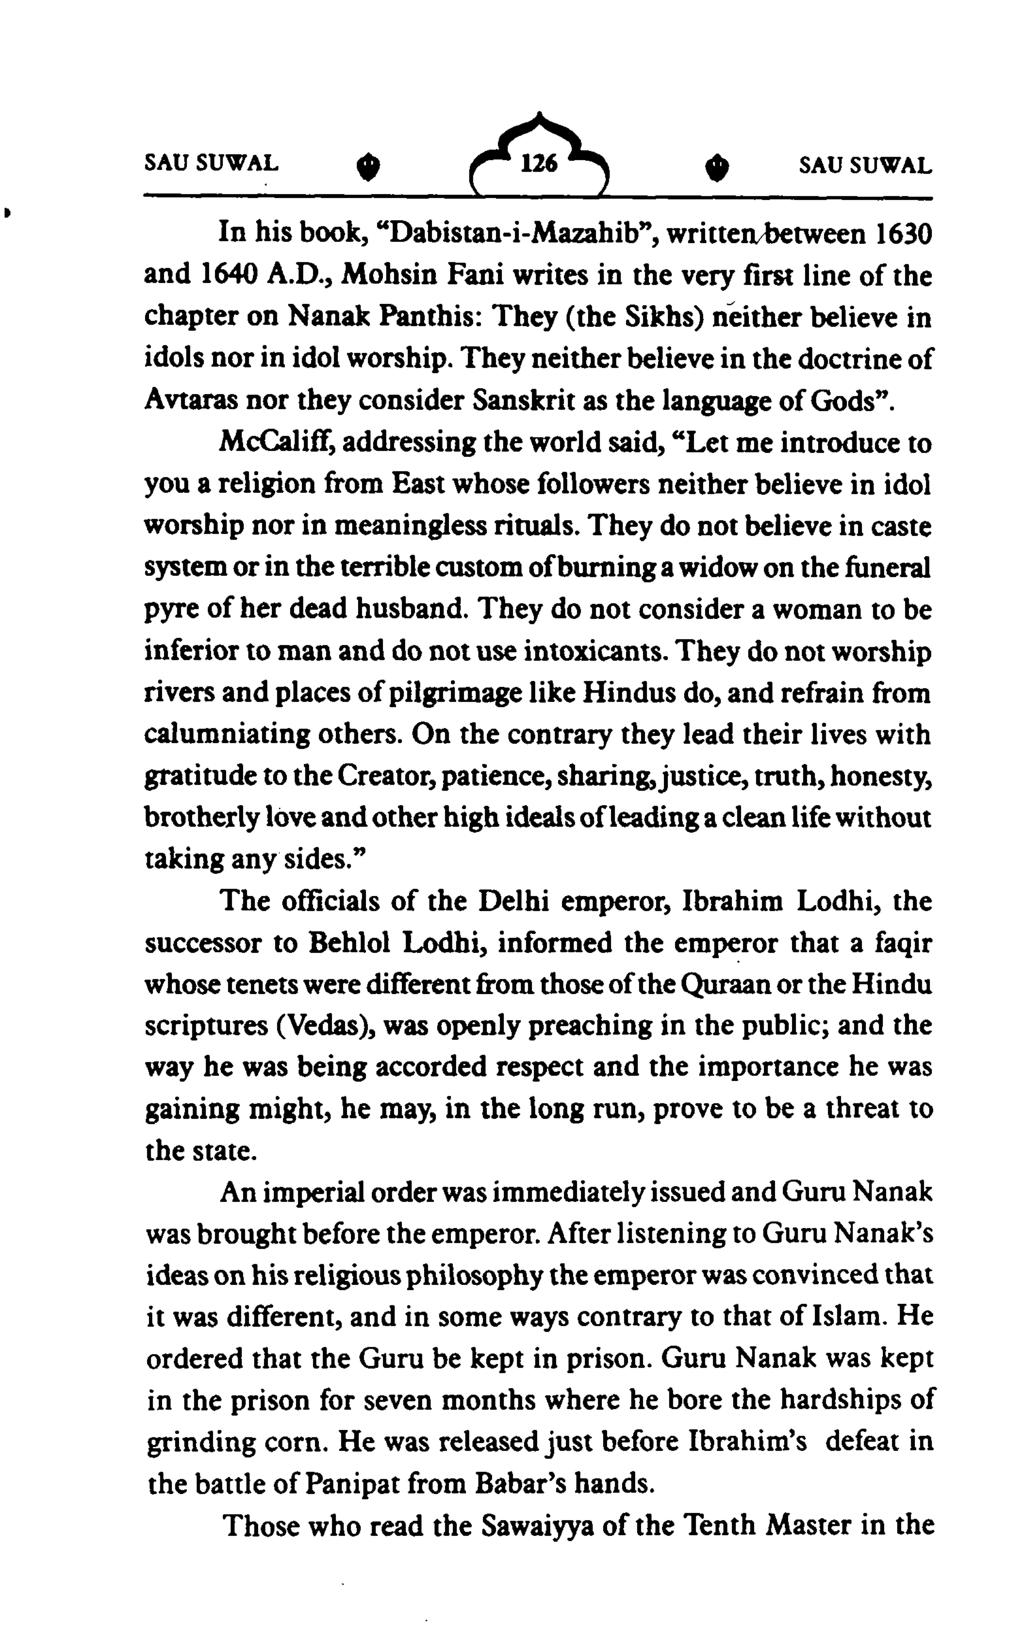 SAUSUWAL SAUSUWAL In his book, "Dabistan-i-Mazahib", writtena>etween 1630 and 1640 A.D., Mohsin Fani writes in the very fim line of the chapter on Nanak Panthis: They (the Sikhs) neither believe in idols nor in idol worship.